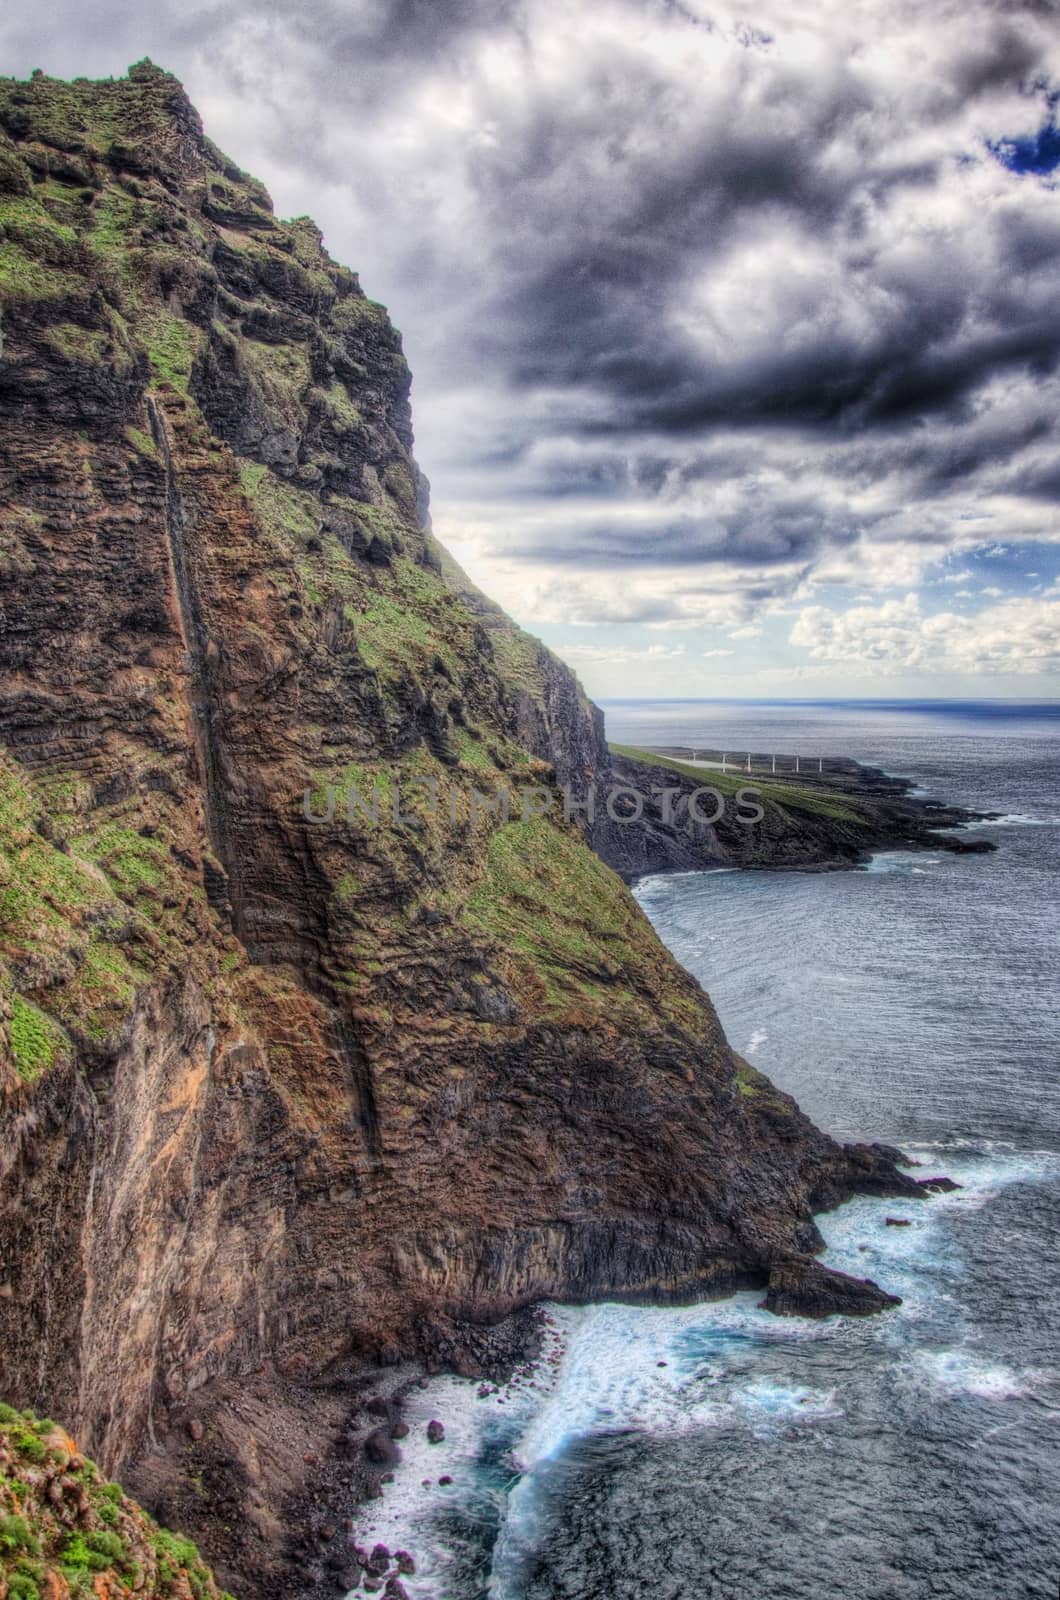 North-west coast of Tenerife, Canarian Islands by Eagle2308